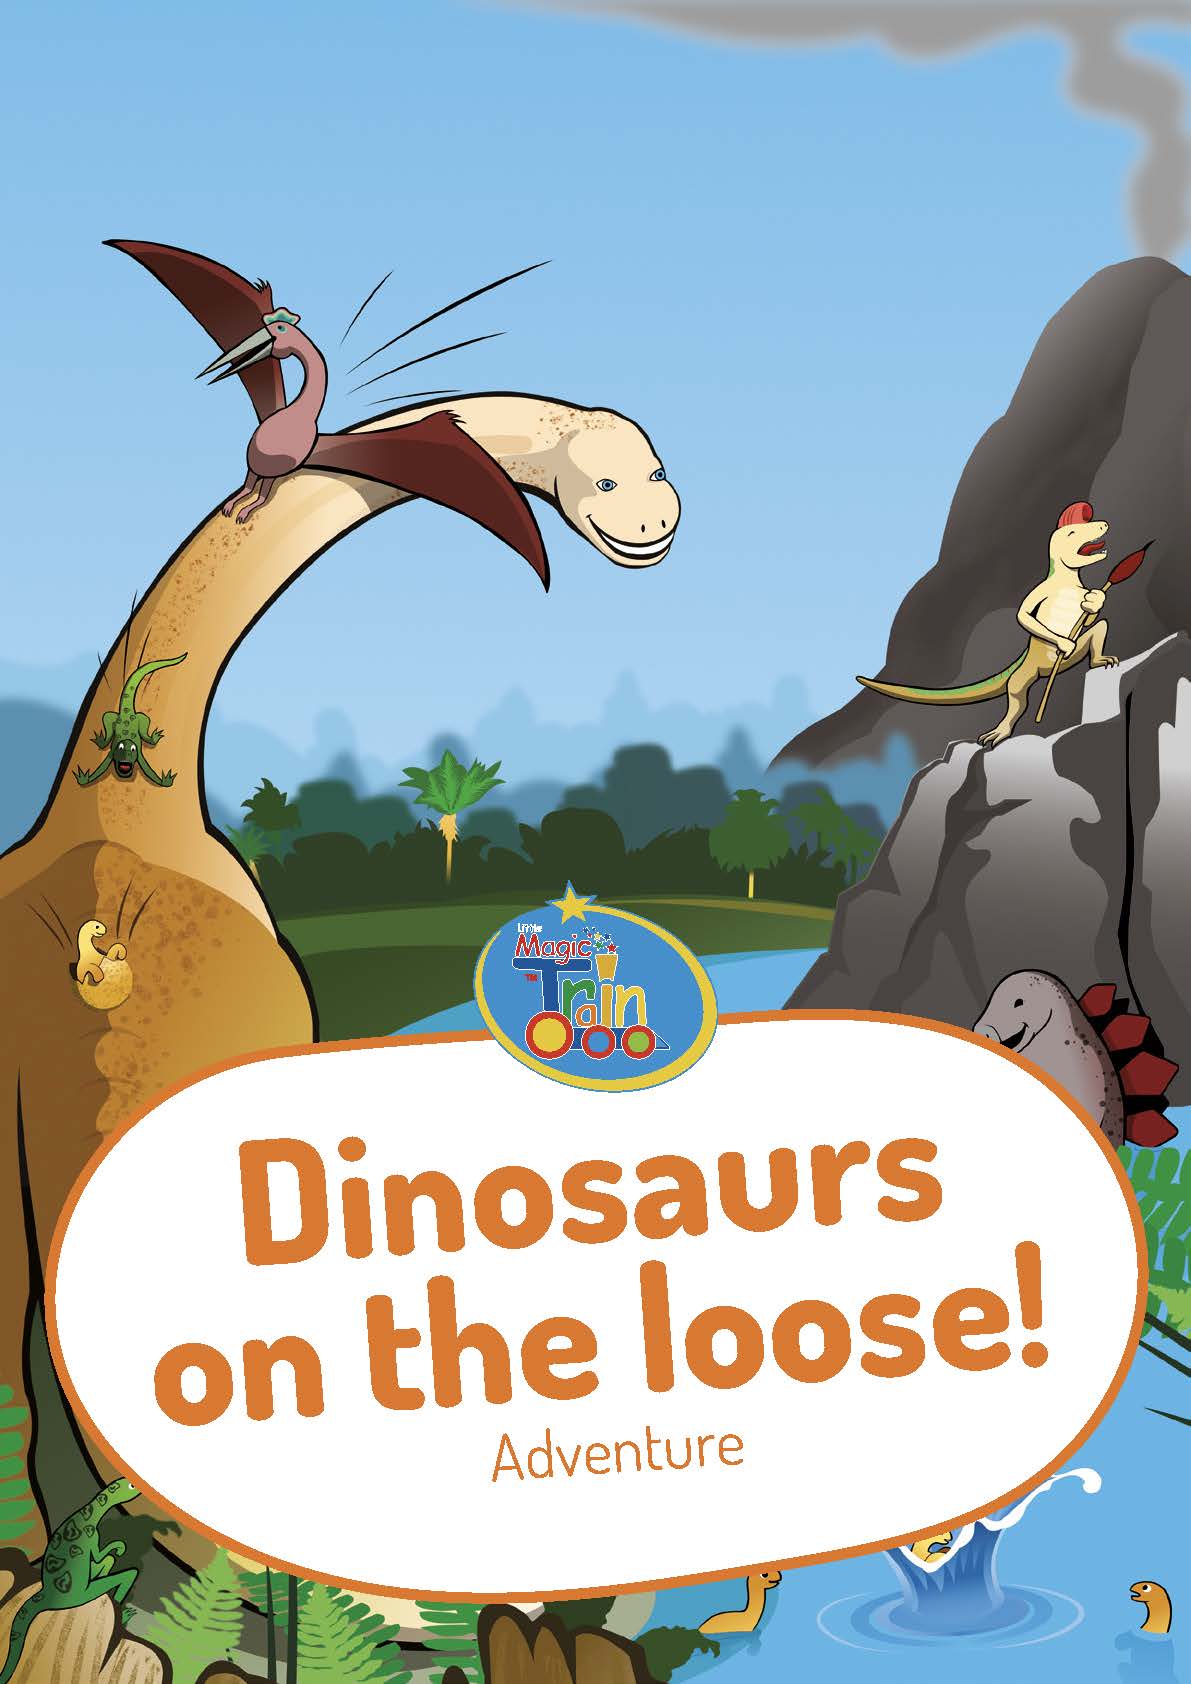 shop-image-dinosaurs-on-the-loose_Page_01